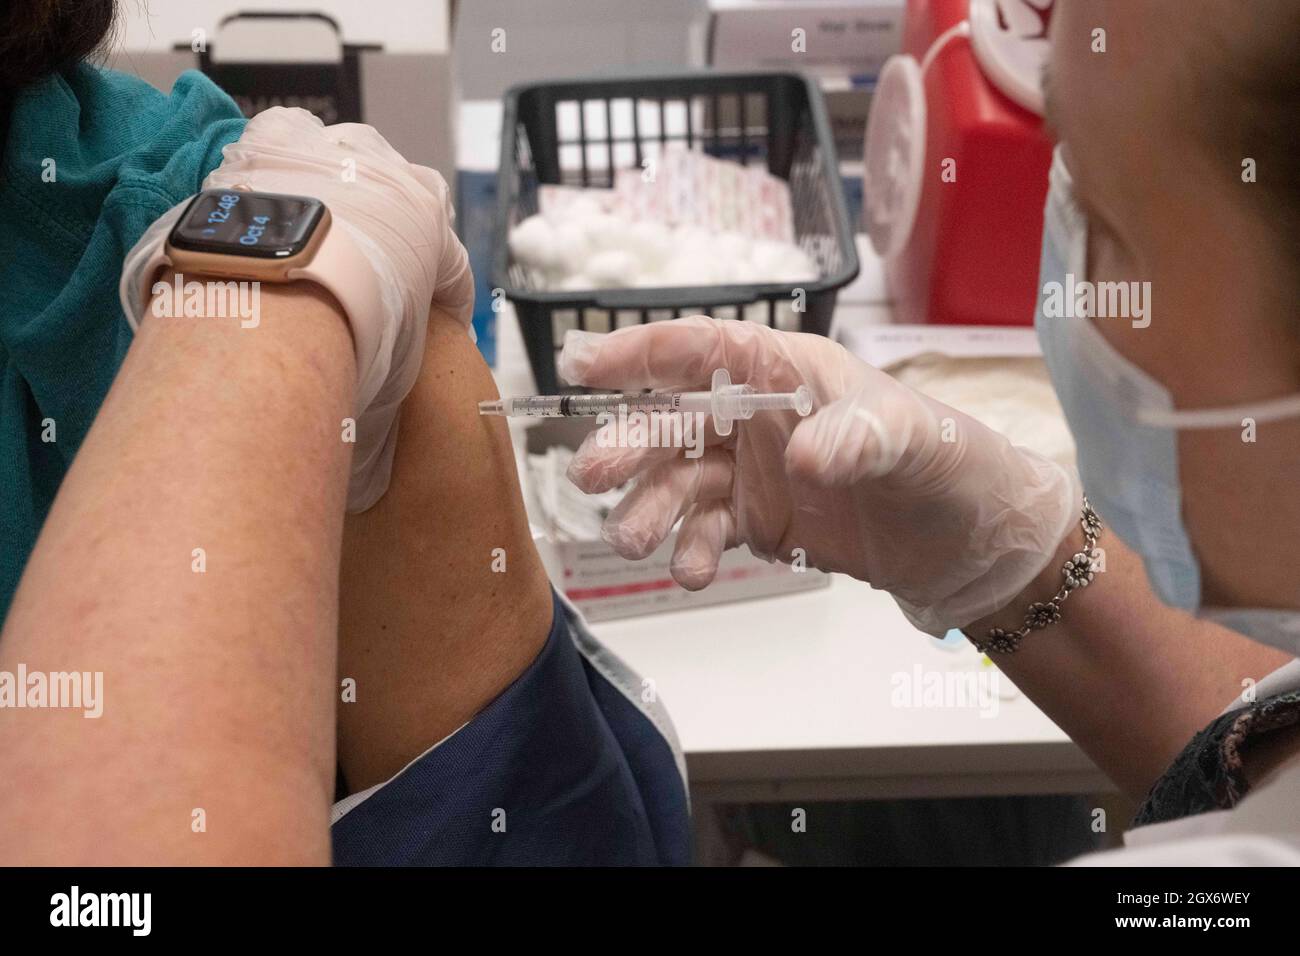 The booster shot for the Pfizer vaccine against COVID-19 is administered to a Texas resident over 65 at a pharmacy clinic in west Austin on October 4, 2021. Doctors are encouraging the vaccine boosters after 6 months of the original shots. Credit: Bob Daemmrich/Alamy Live News Stock Photo